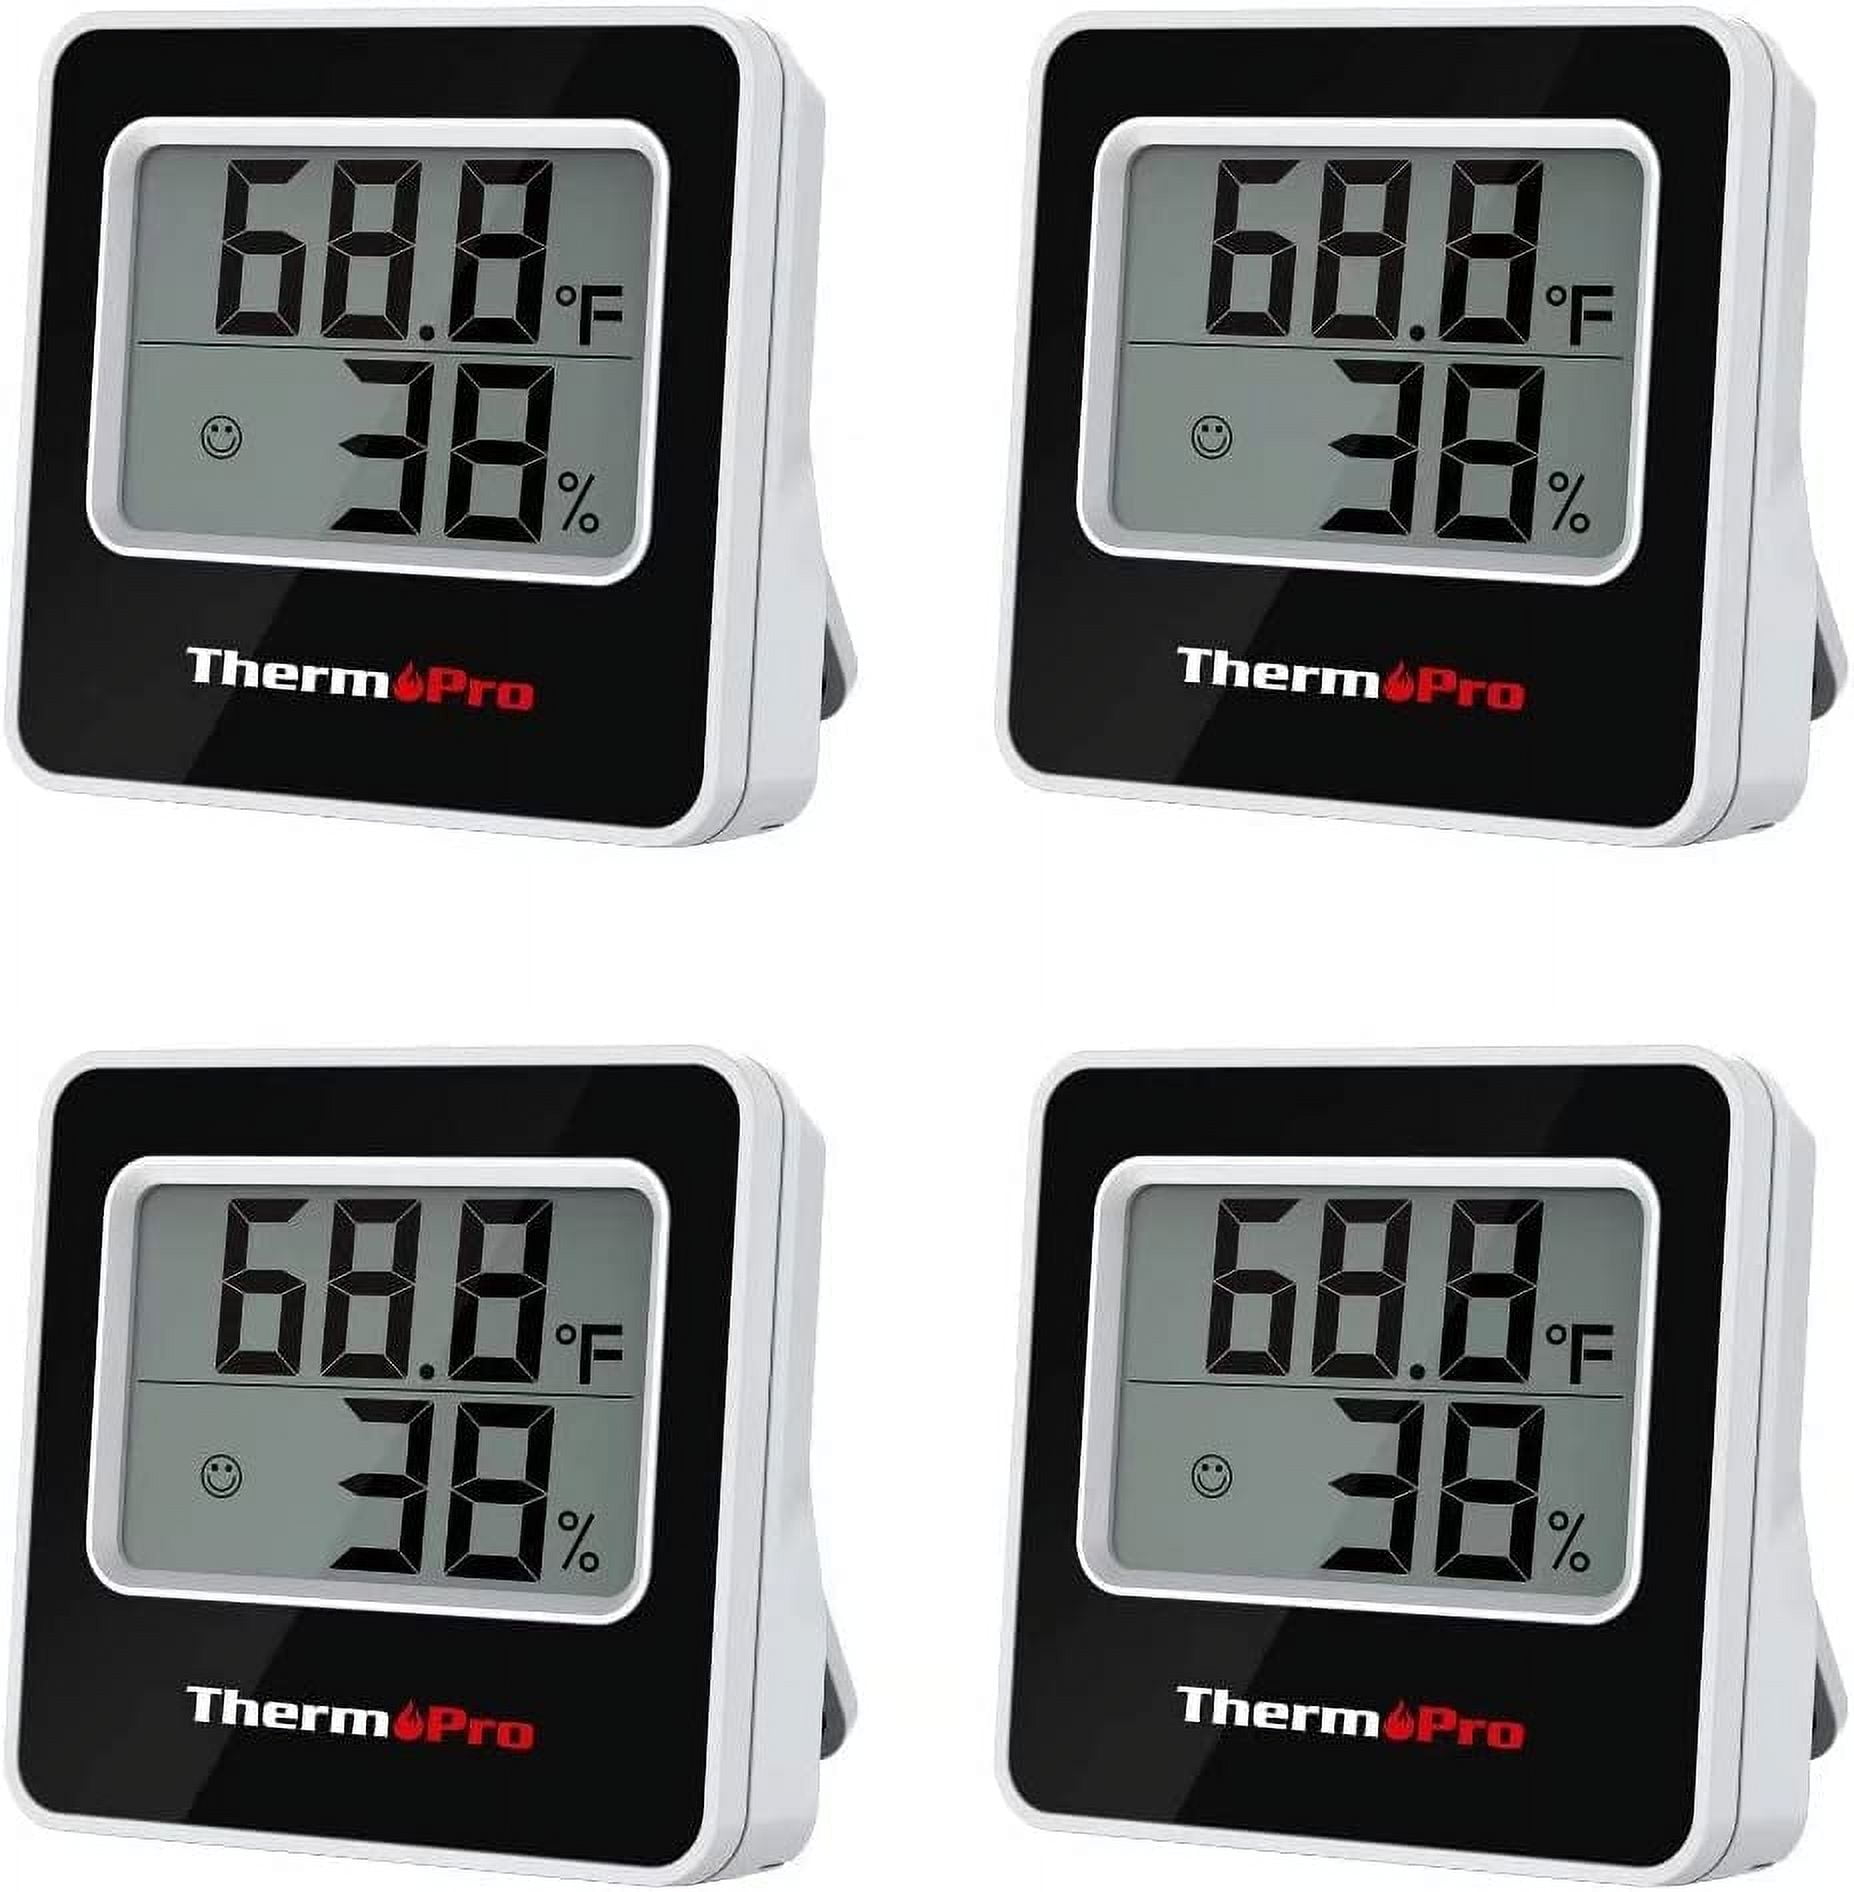 ThermoPro TP157 Hygrometer Indoor Thermometer for Home, Room Thermometer  Humidity Meter with Accurate Temperature Humidity Sensor for Greenhouse  Baby